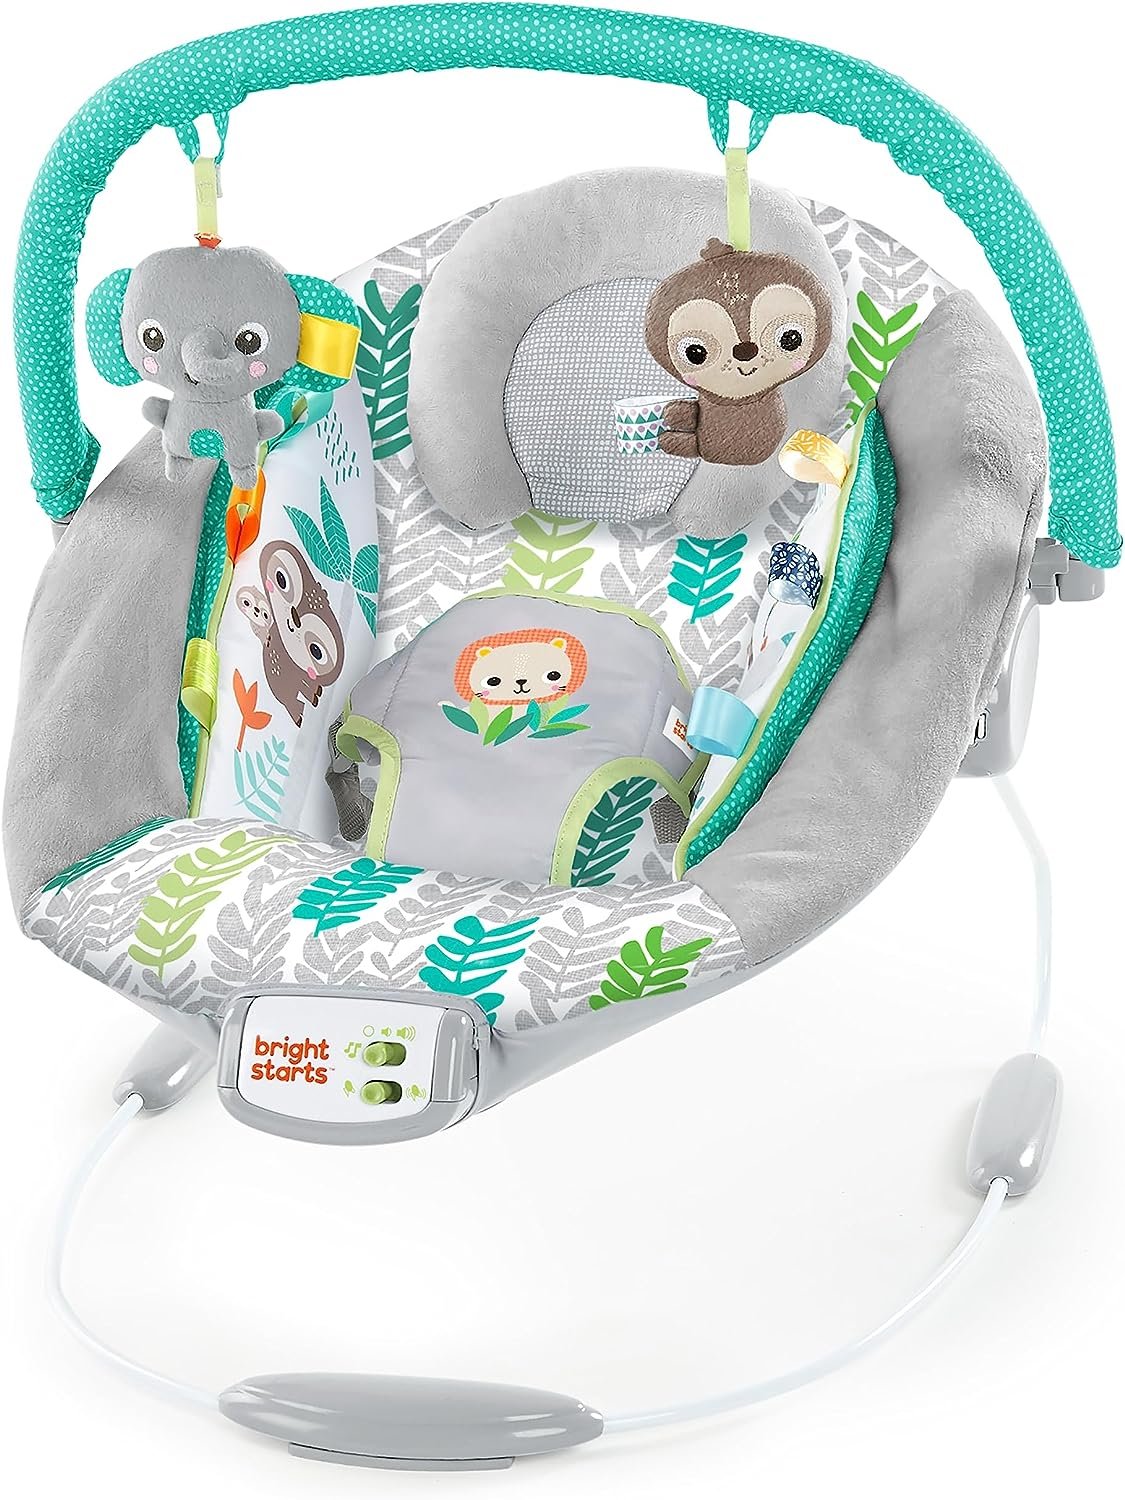 Bright Starts Comfy Baby Bouncer Soothing Vibrations Infant Seat - Taggies, Music, Removable-Toy Bar, 0-6 Months Up to 20 lbs (Jungle Vines)